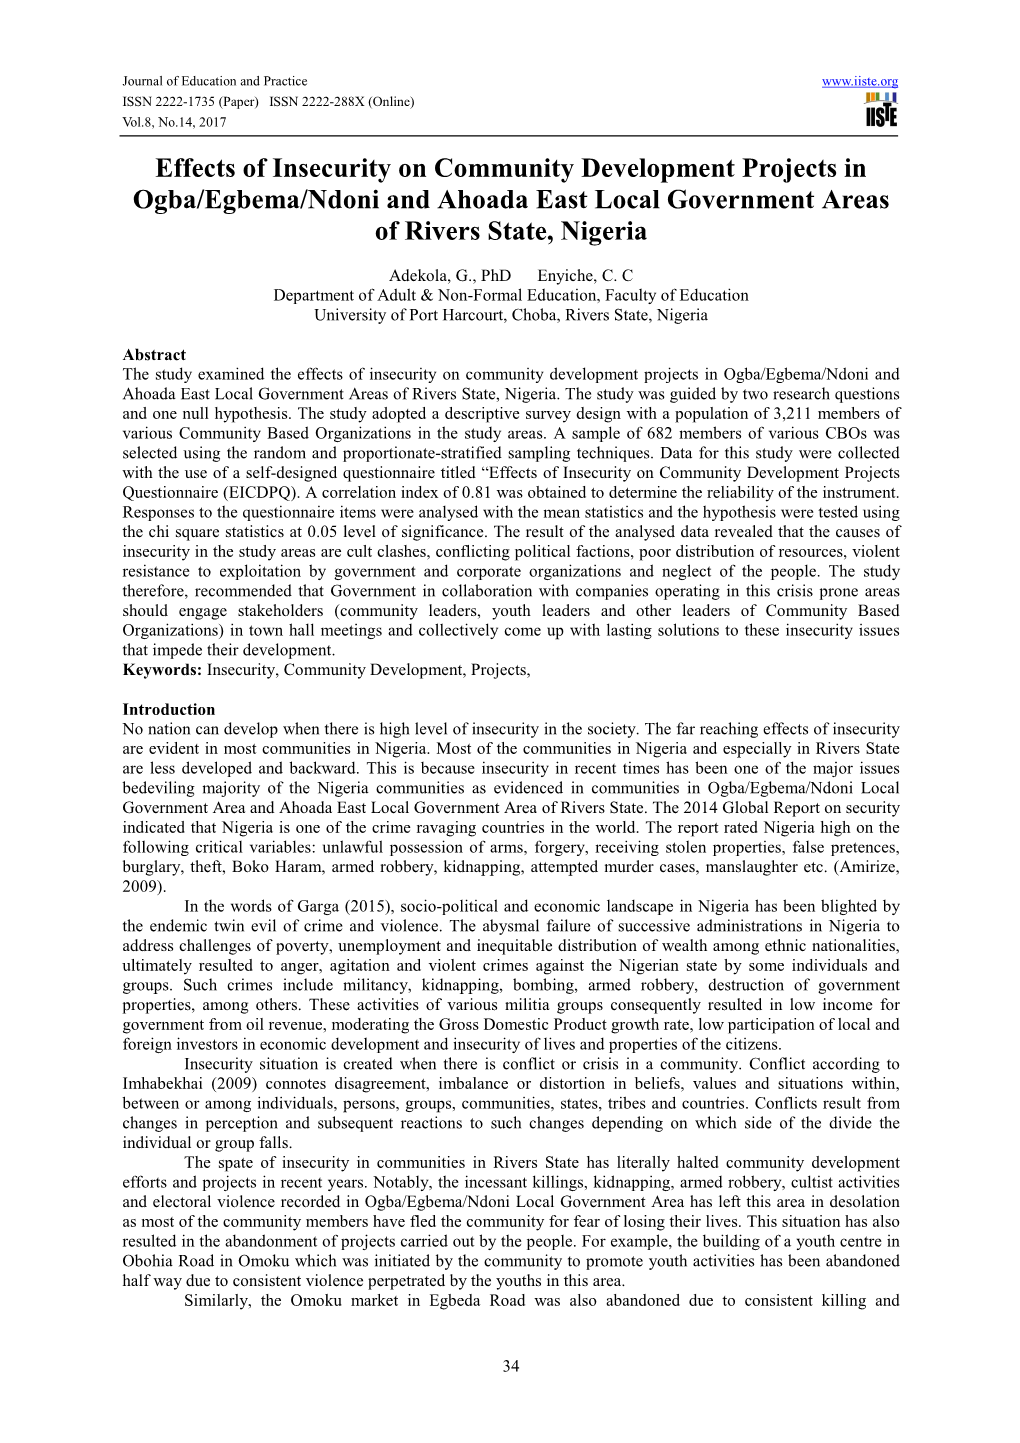 Effects of Insecurity on Community Development Projects in Ogba/Egbema/Ndoni and Ahoada East Local Government Areas of Rivers State, Nigeria